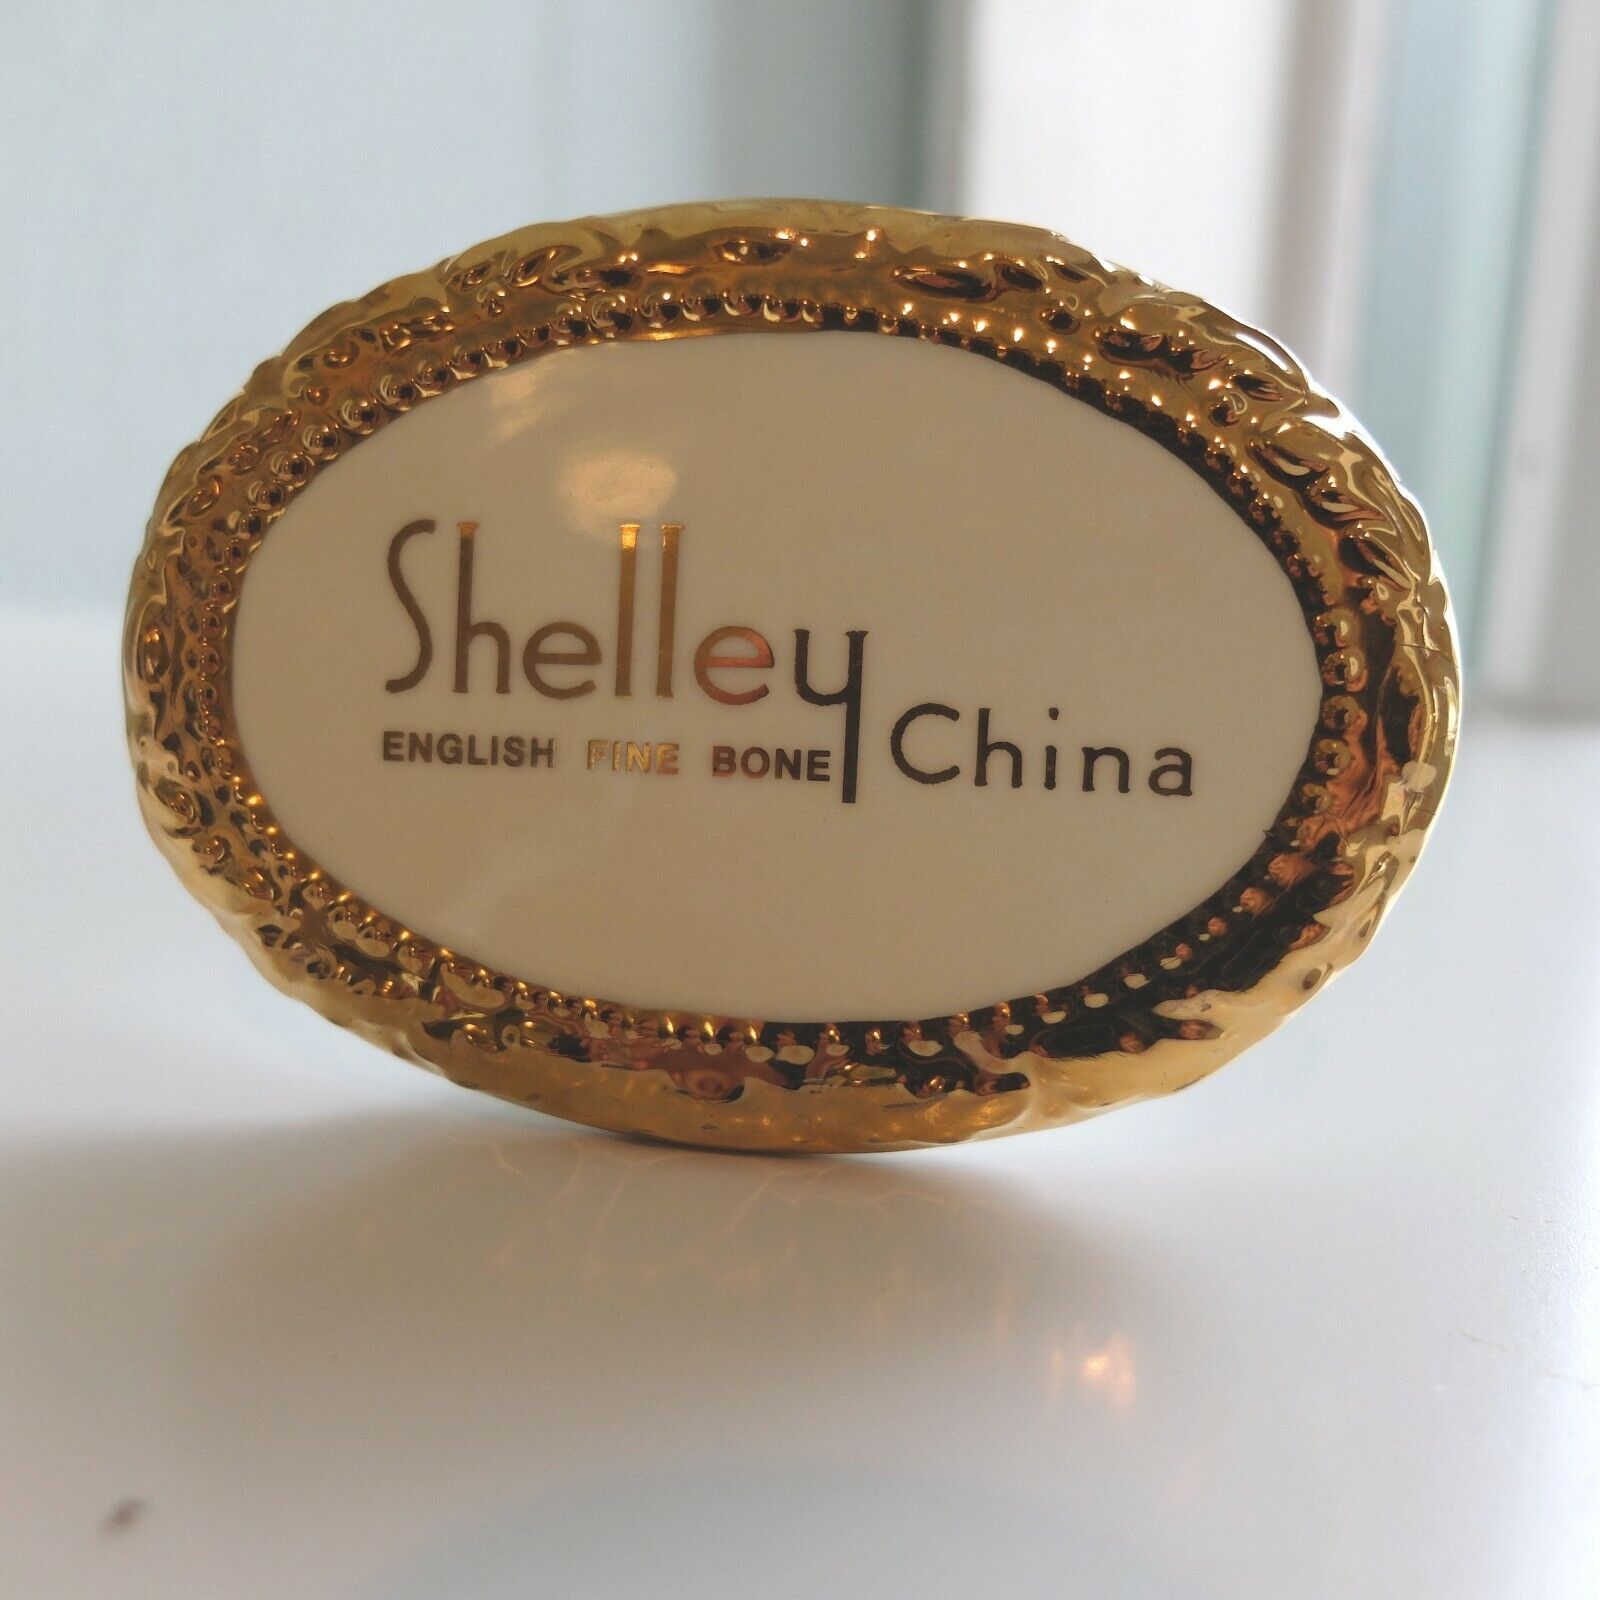 Vintage Shelley English China Commemorative Sign Limited Edition Number 29 o 500